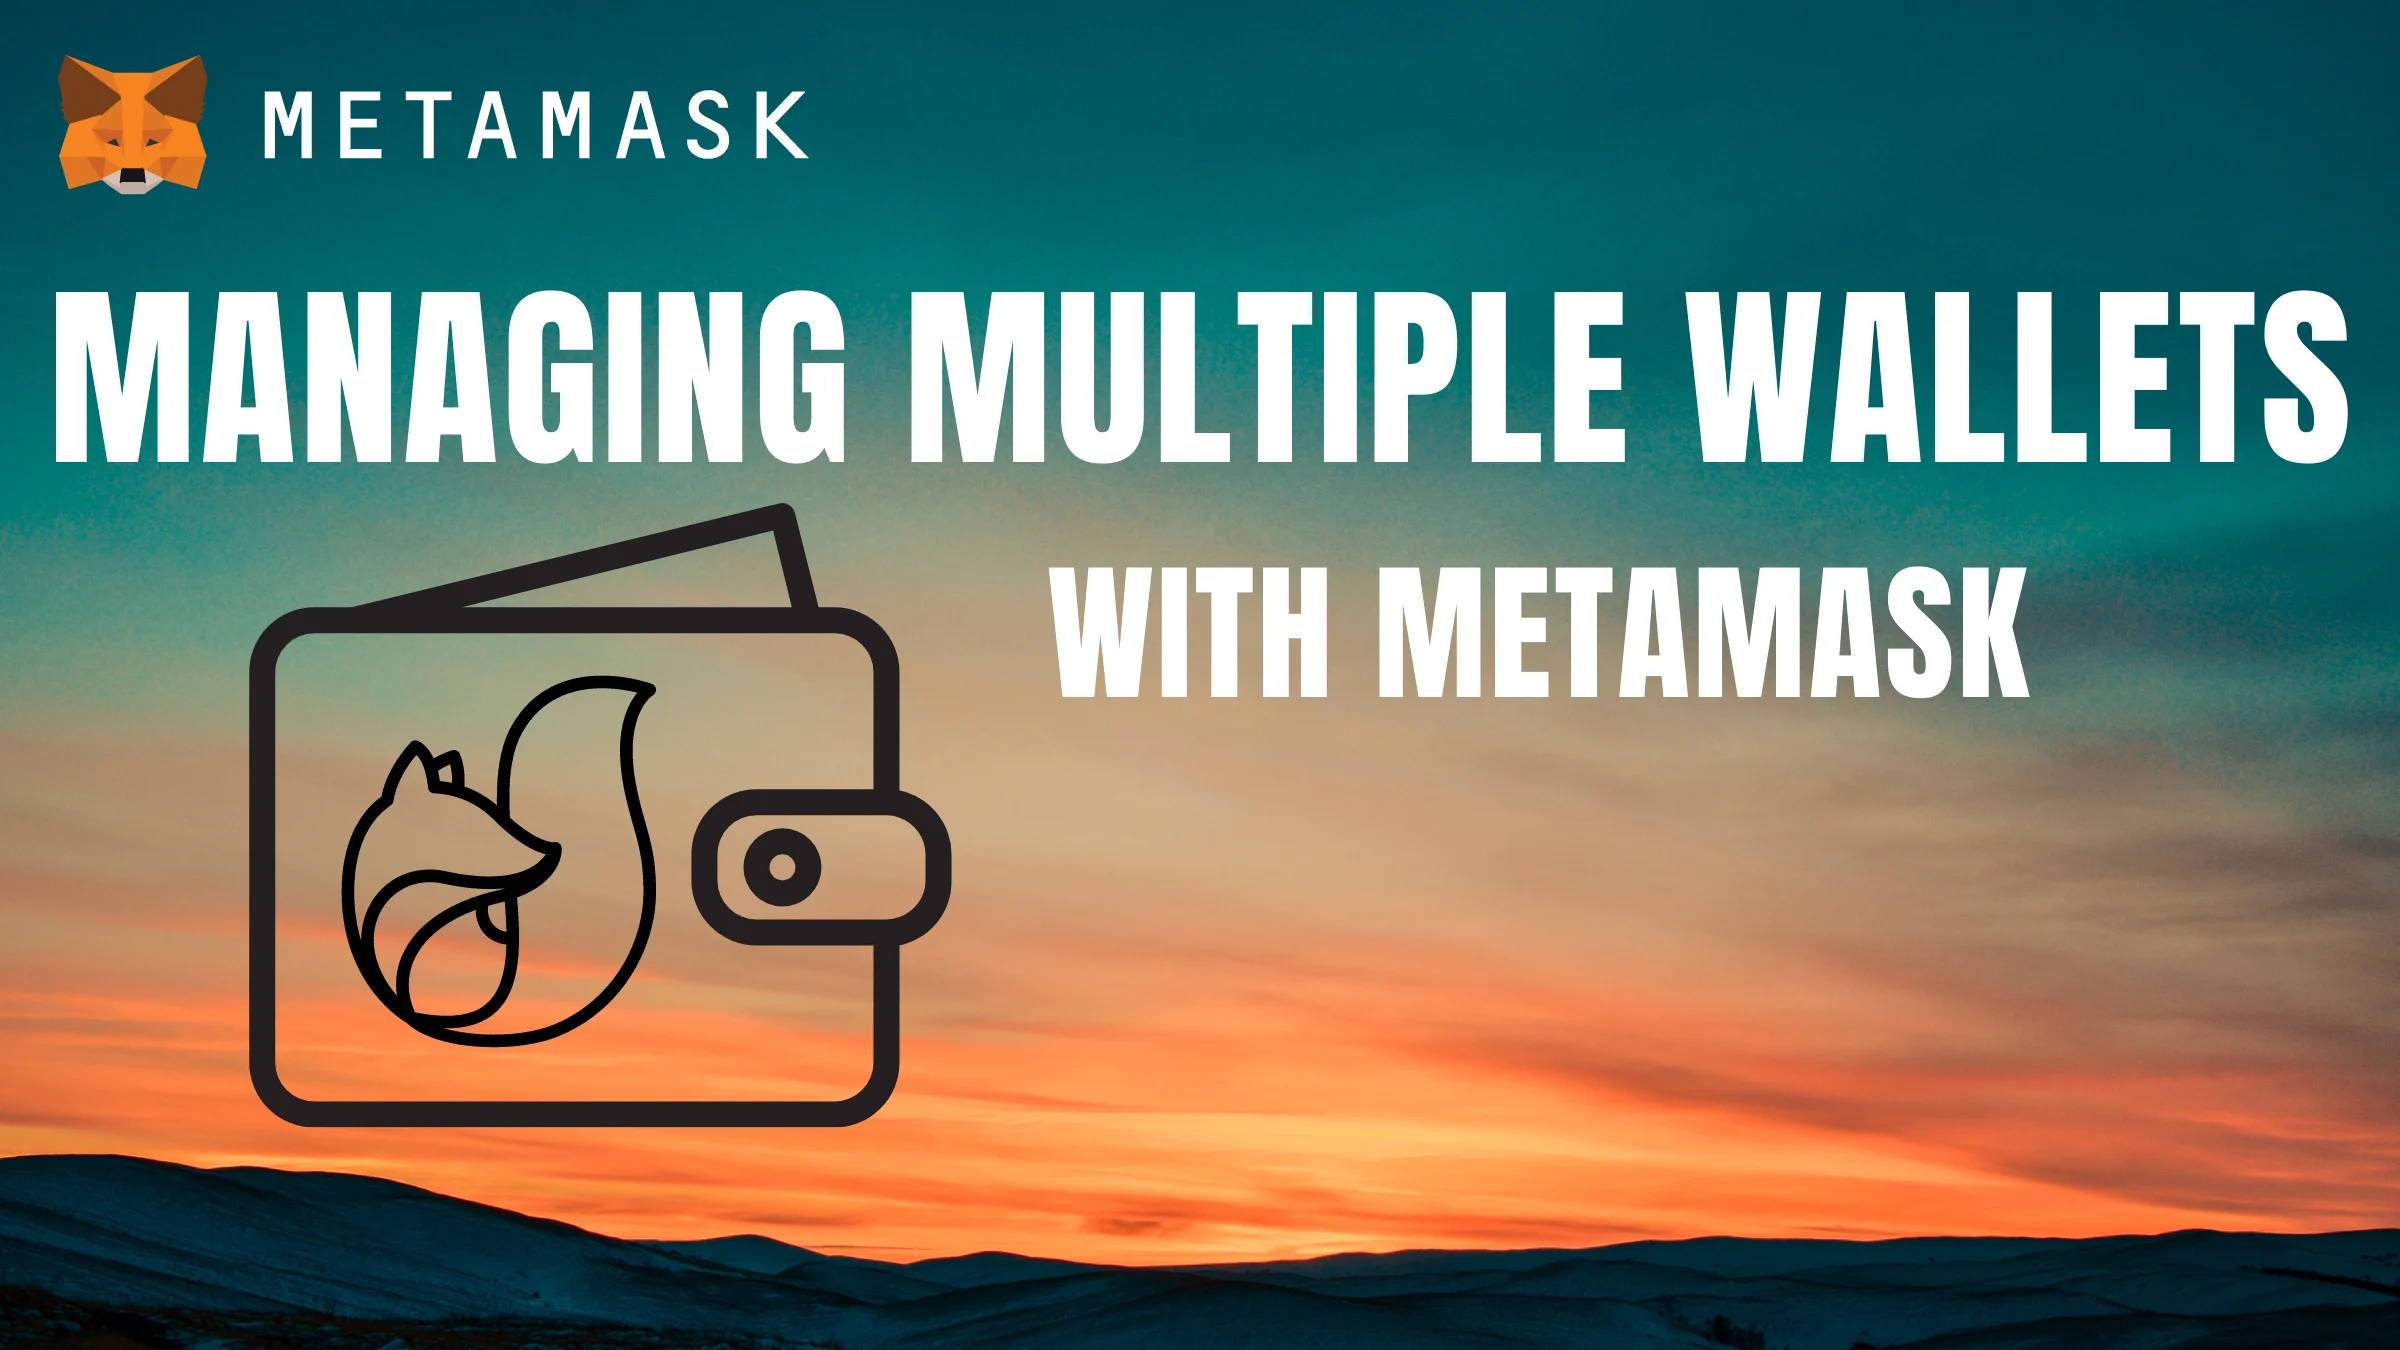 Image: How to Manage Multiple Wallets with MetaMask